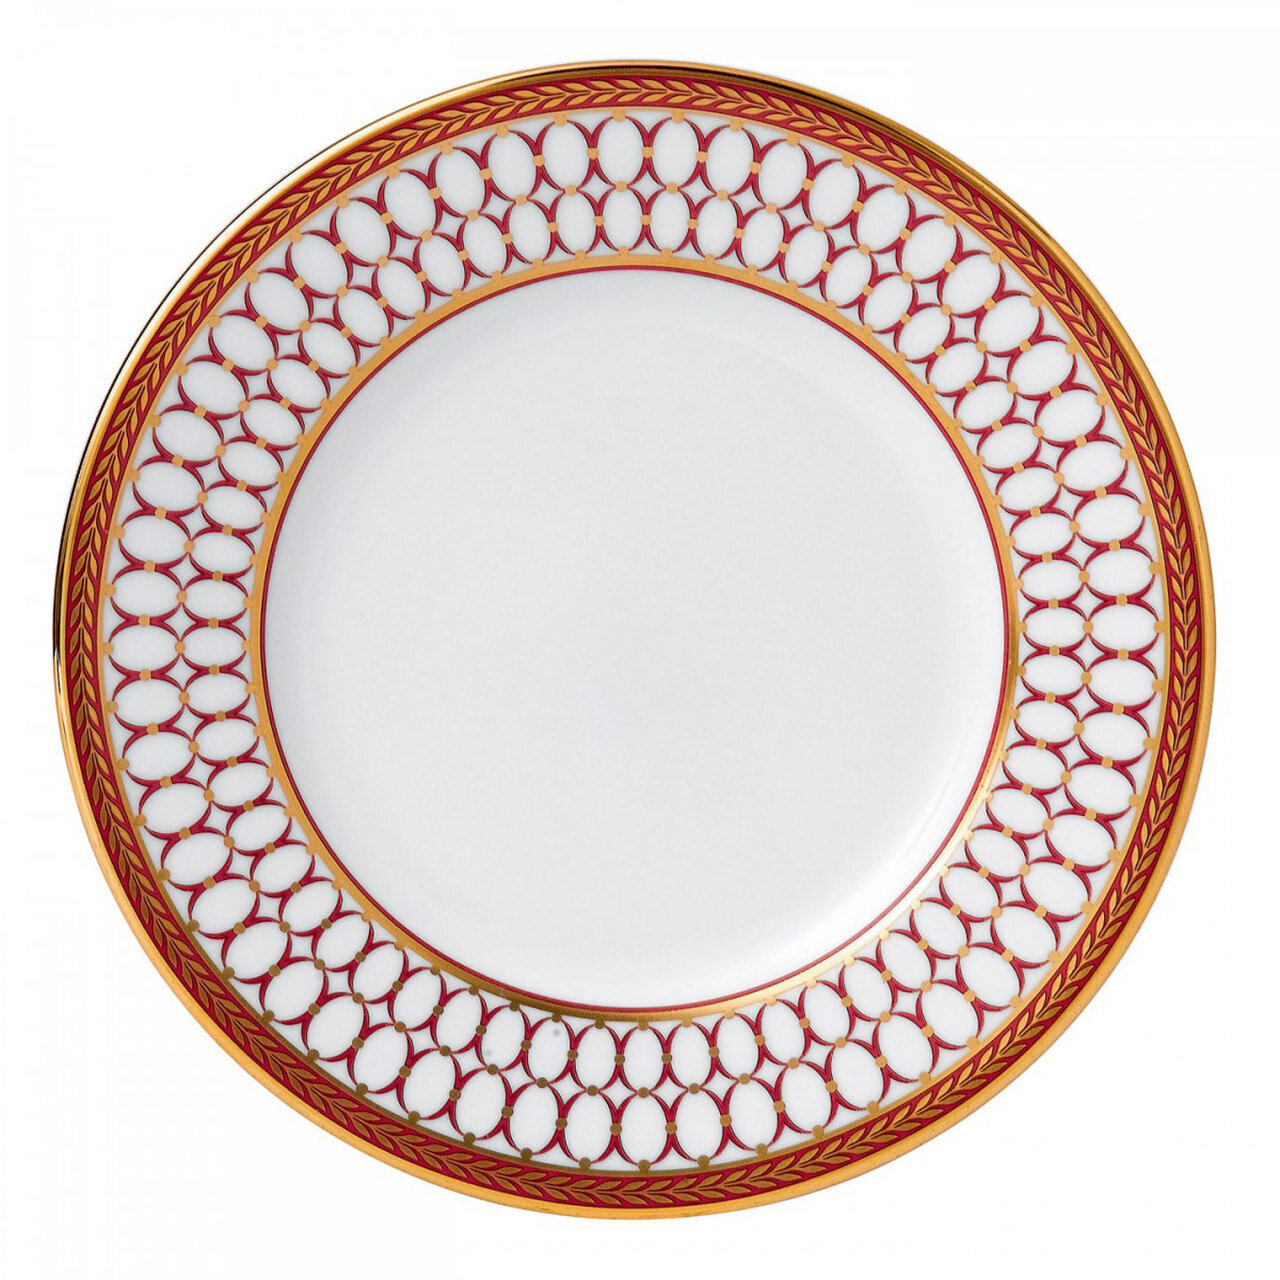 Wedgwood Renaissance Red Bread and Butter Plate 6 Inch